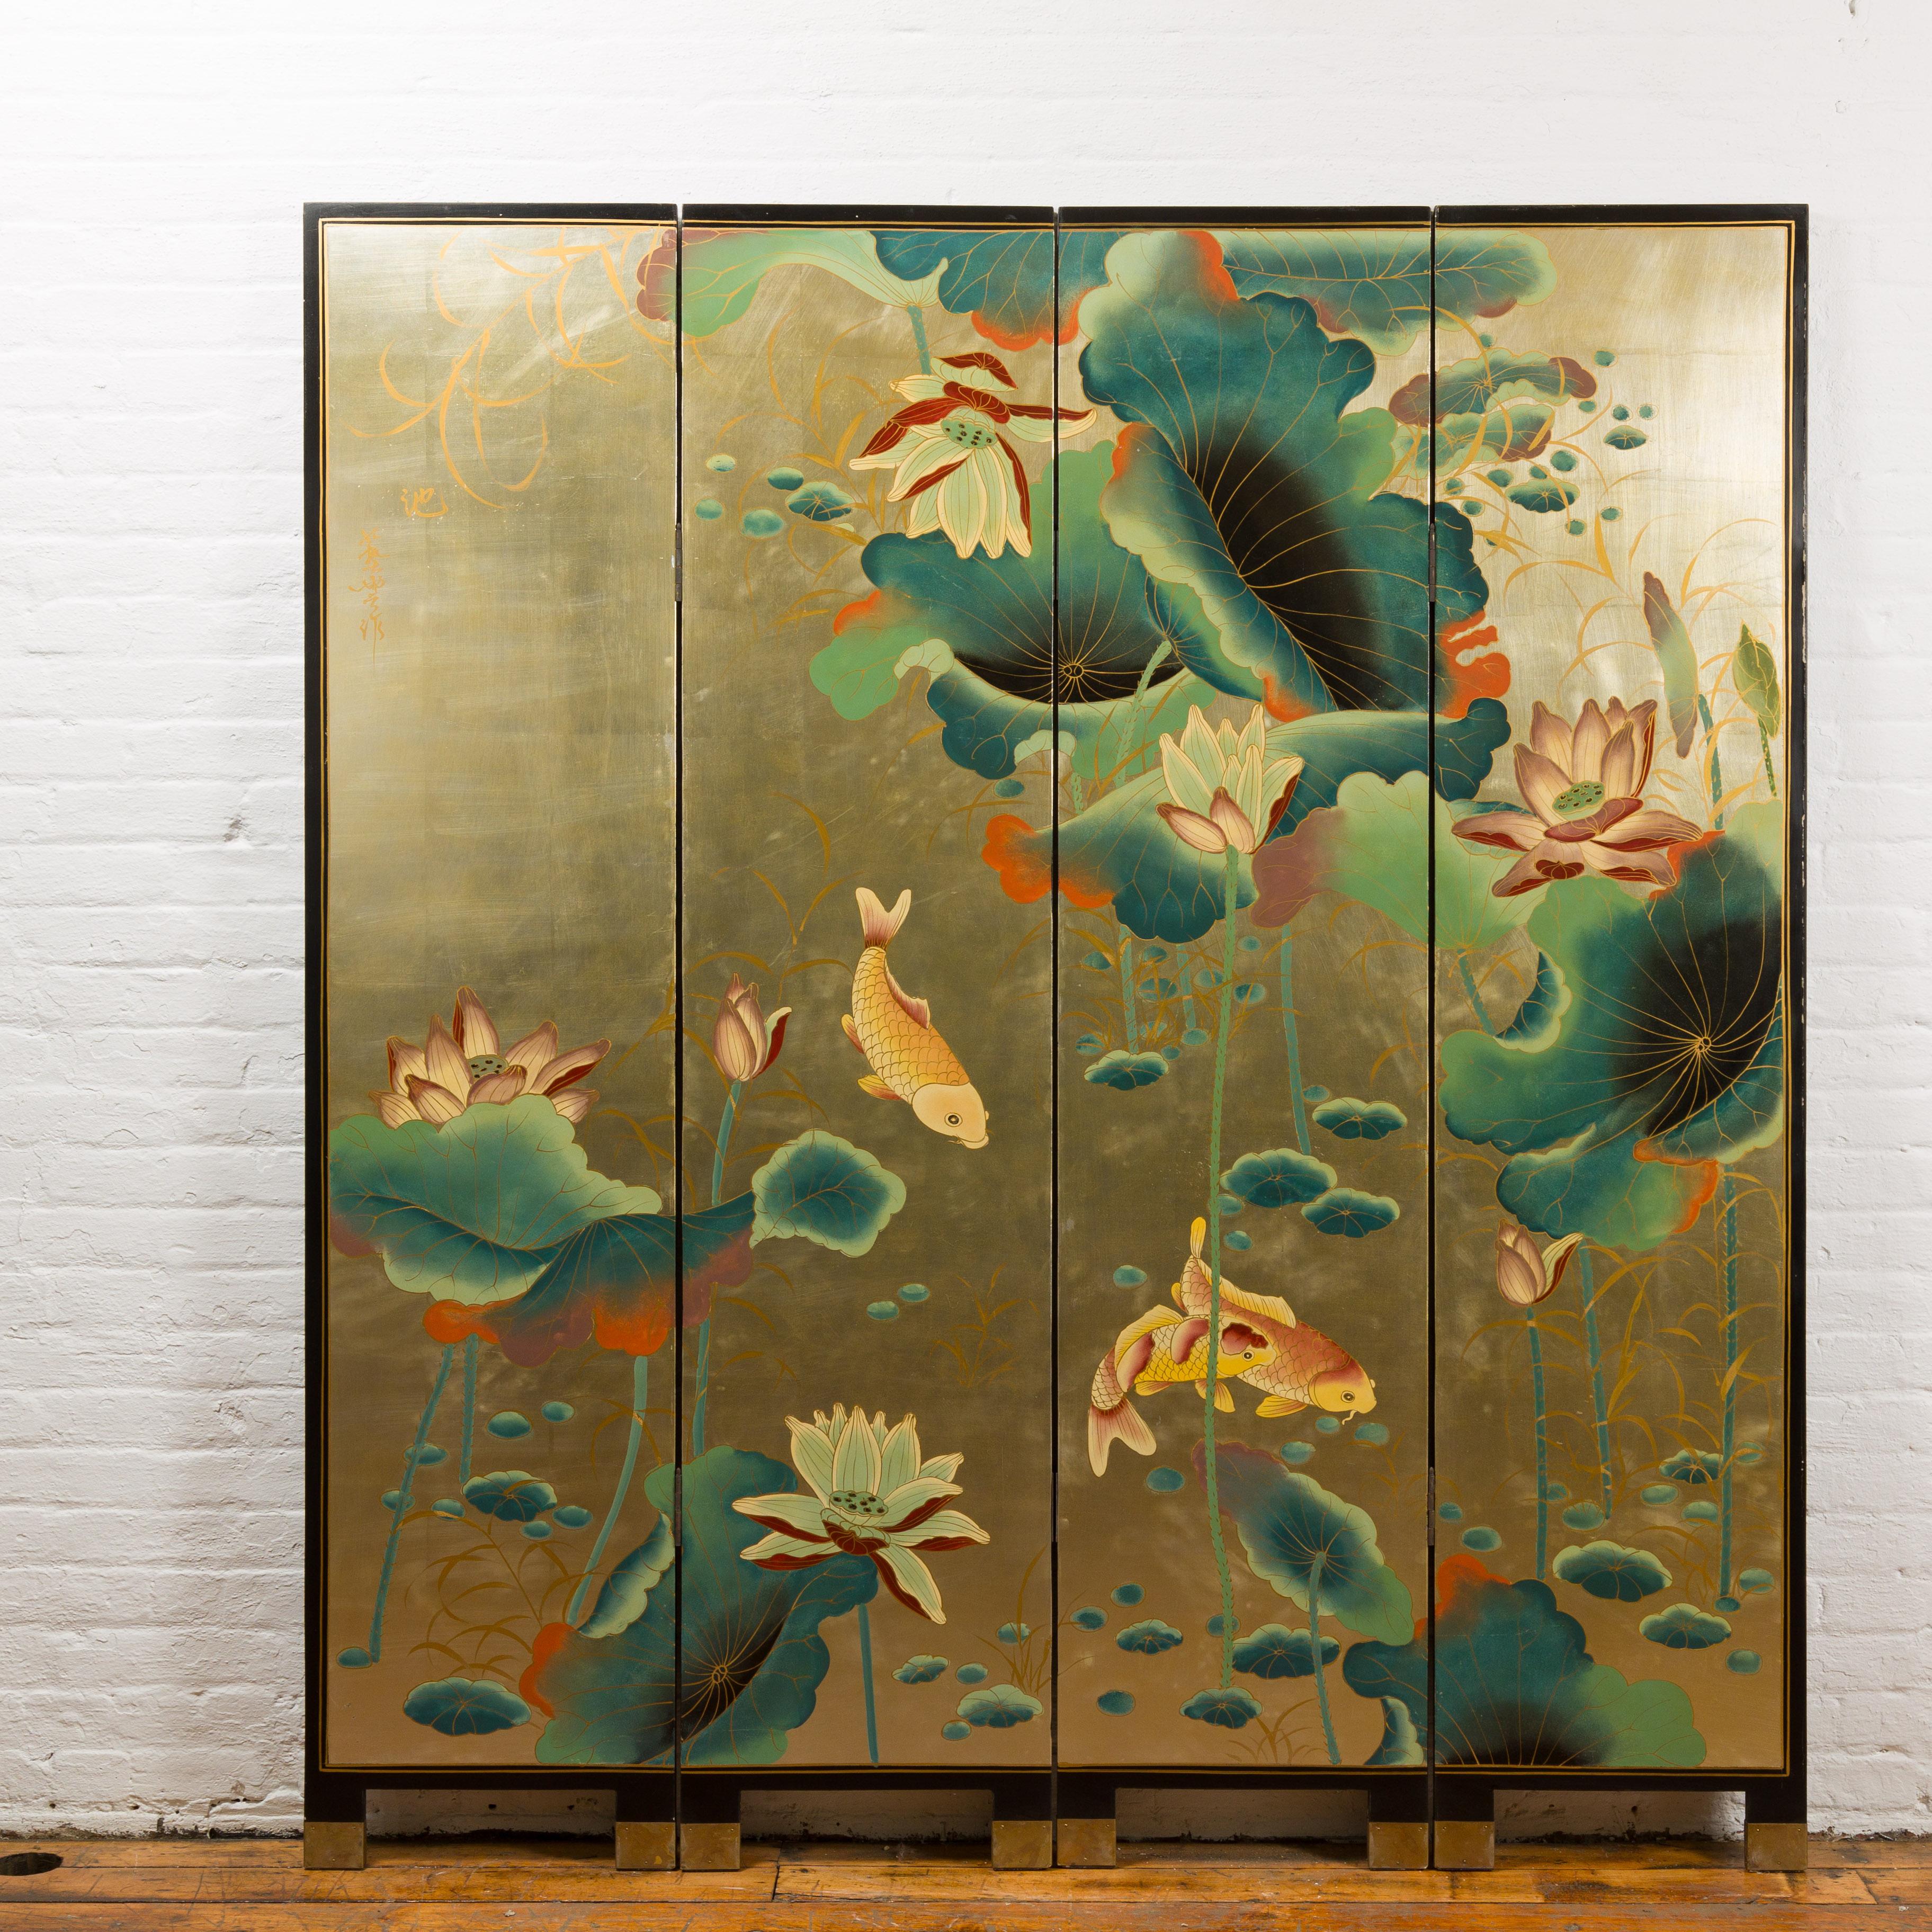 A Chinese Antique Gold Leaf Koi Fish Floor Screen and Room Divider from the mid 20th century with lotus flowers and Koi fishes. Step into an ethereal realm with this resplendent mid-20th century Chinese Export Coromandel screen, inspired by the